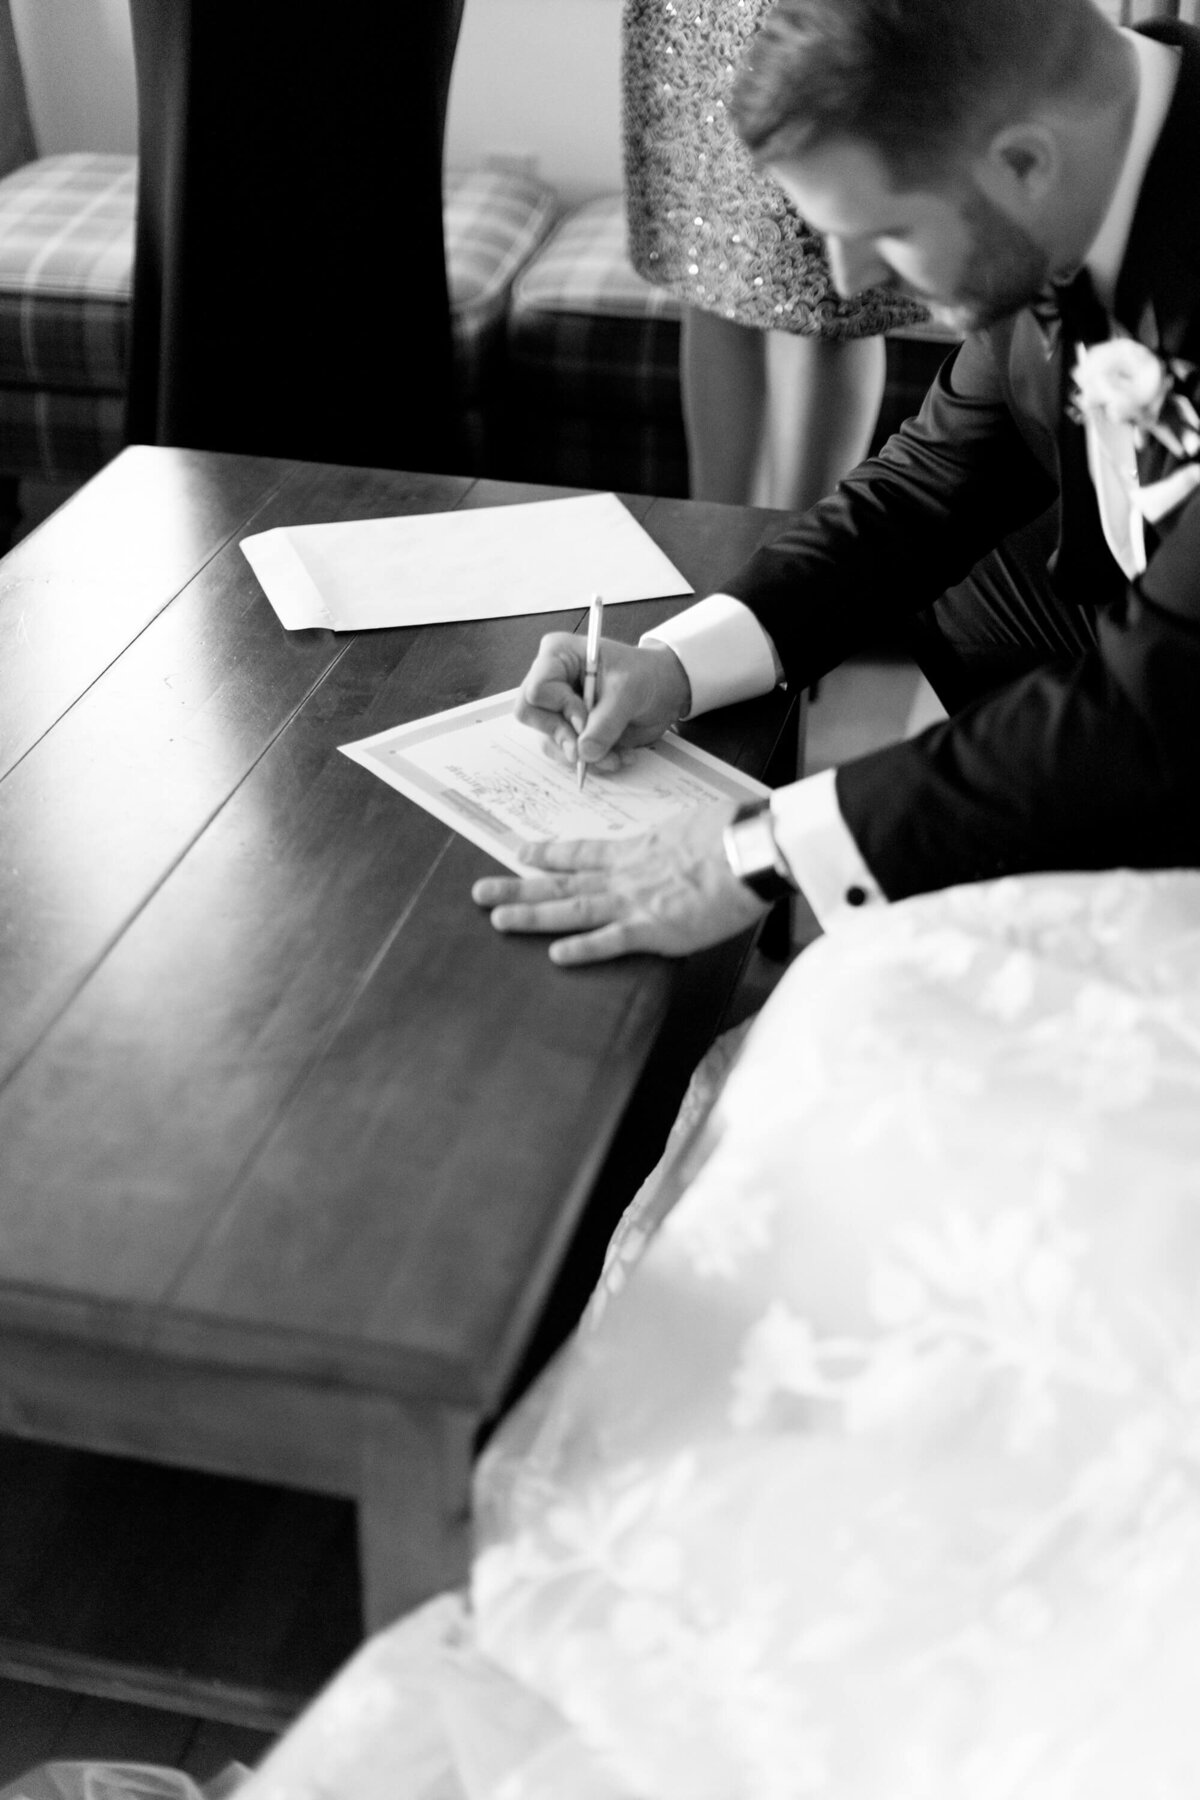 Handsome bridegroom-to-be in black wedding suit and a watch signs the marriage registration certificate on a tabletop.